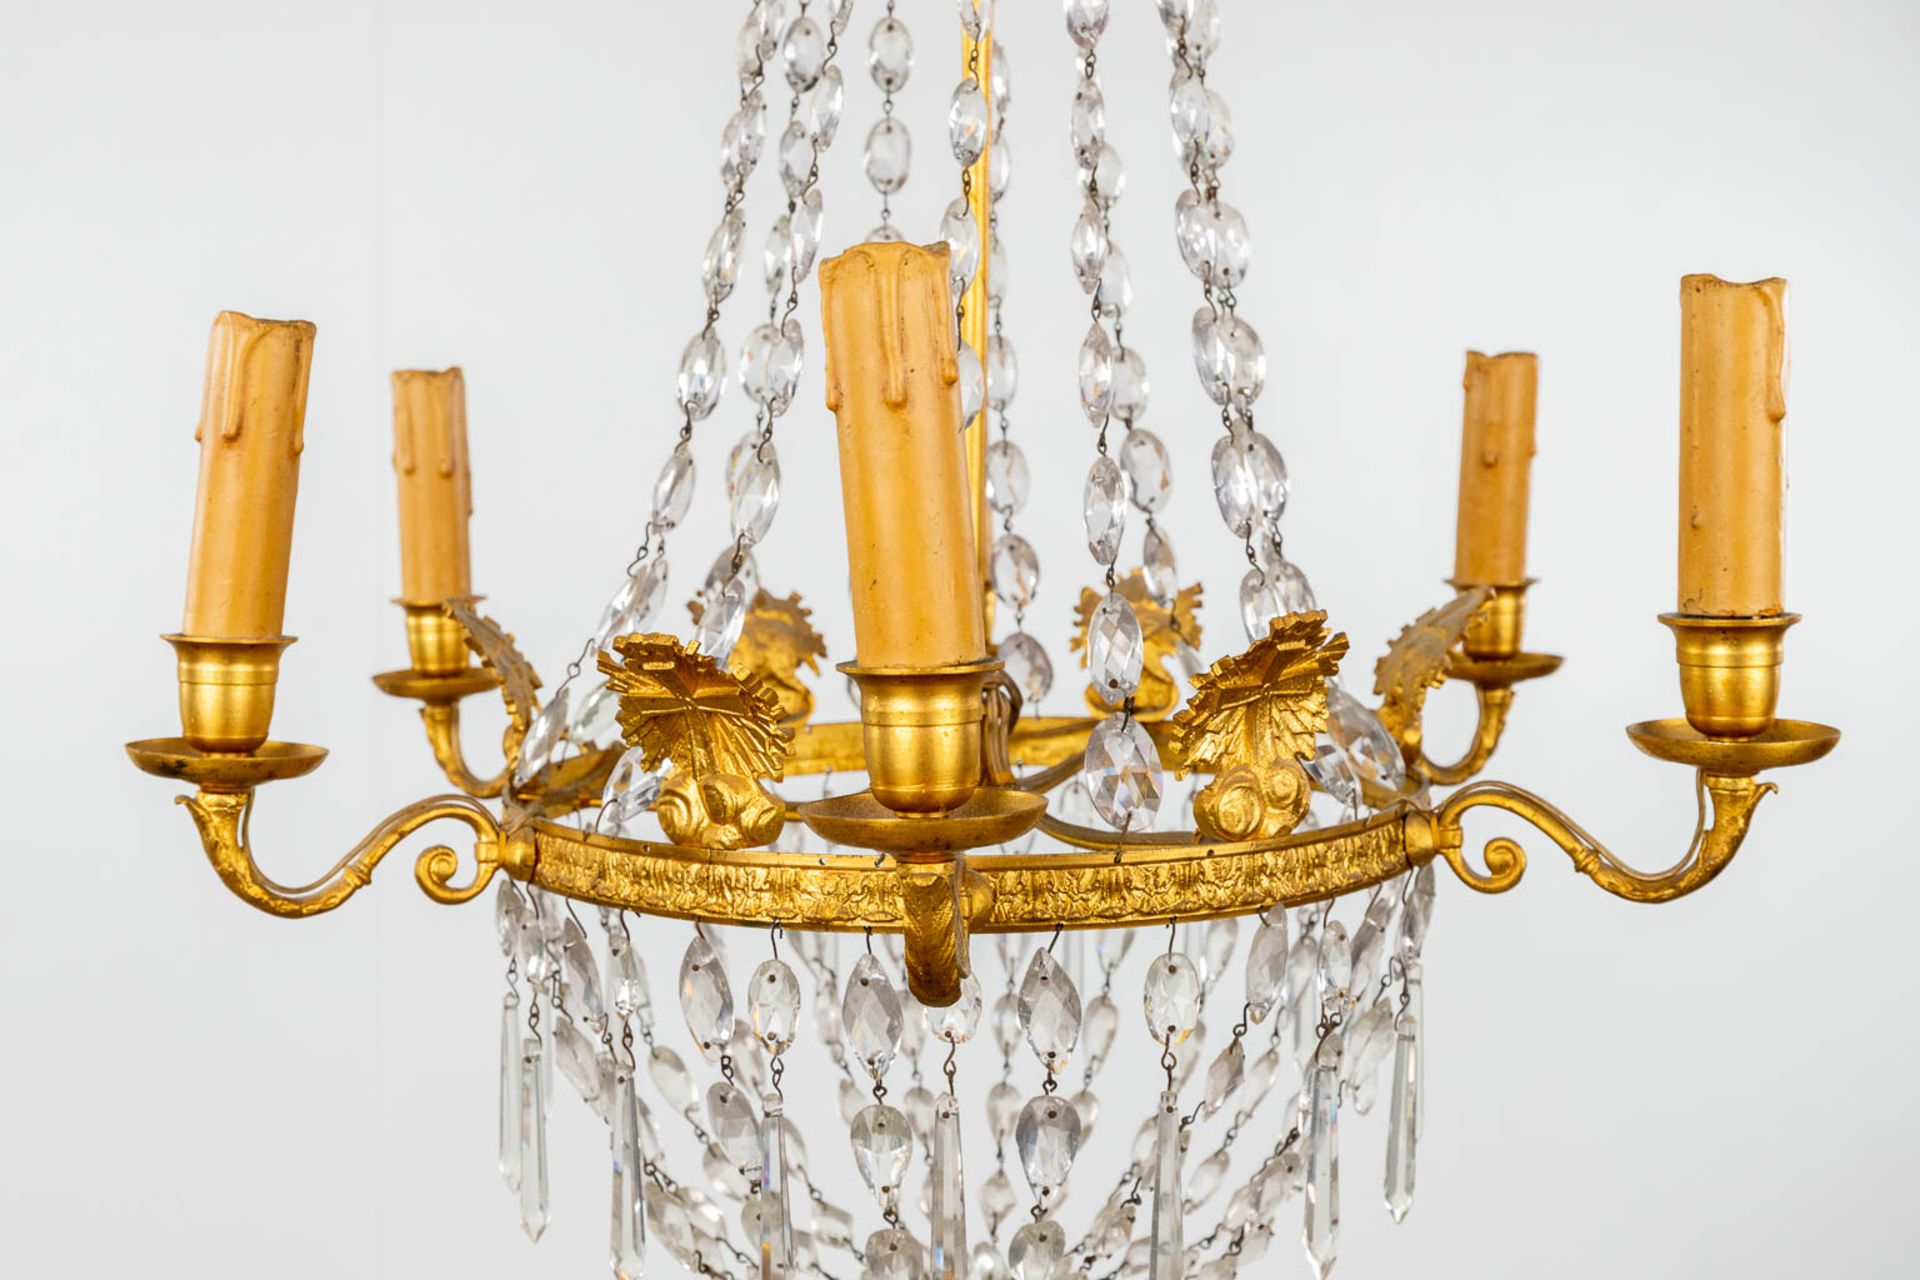 A chandelier 'Sac ˆ Perles', bronze and glass in empire style. 20th C. (H: 100 x D: 50 cm) - Image 3 of 11